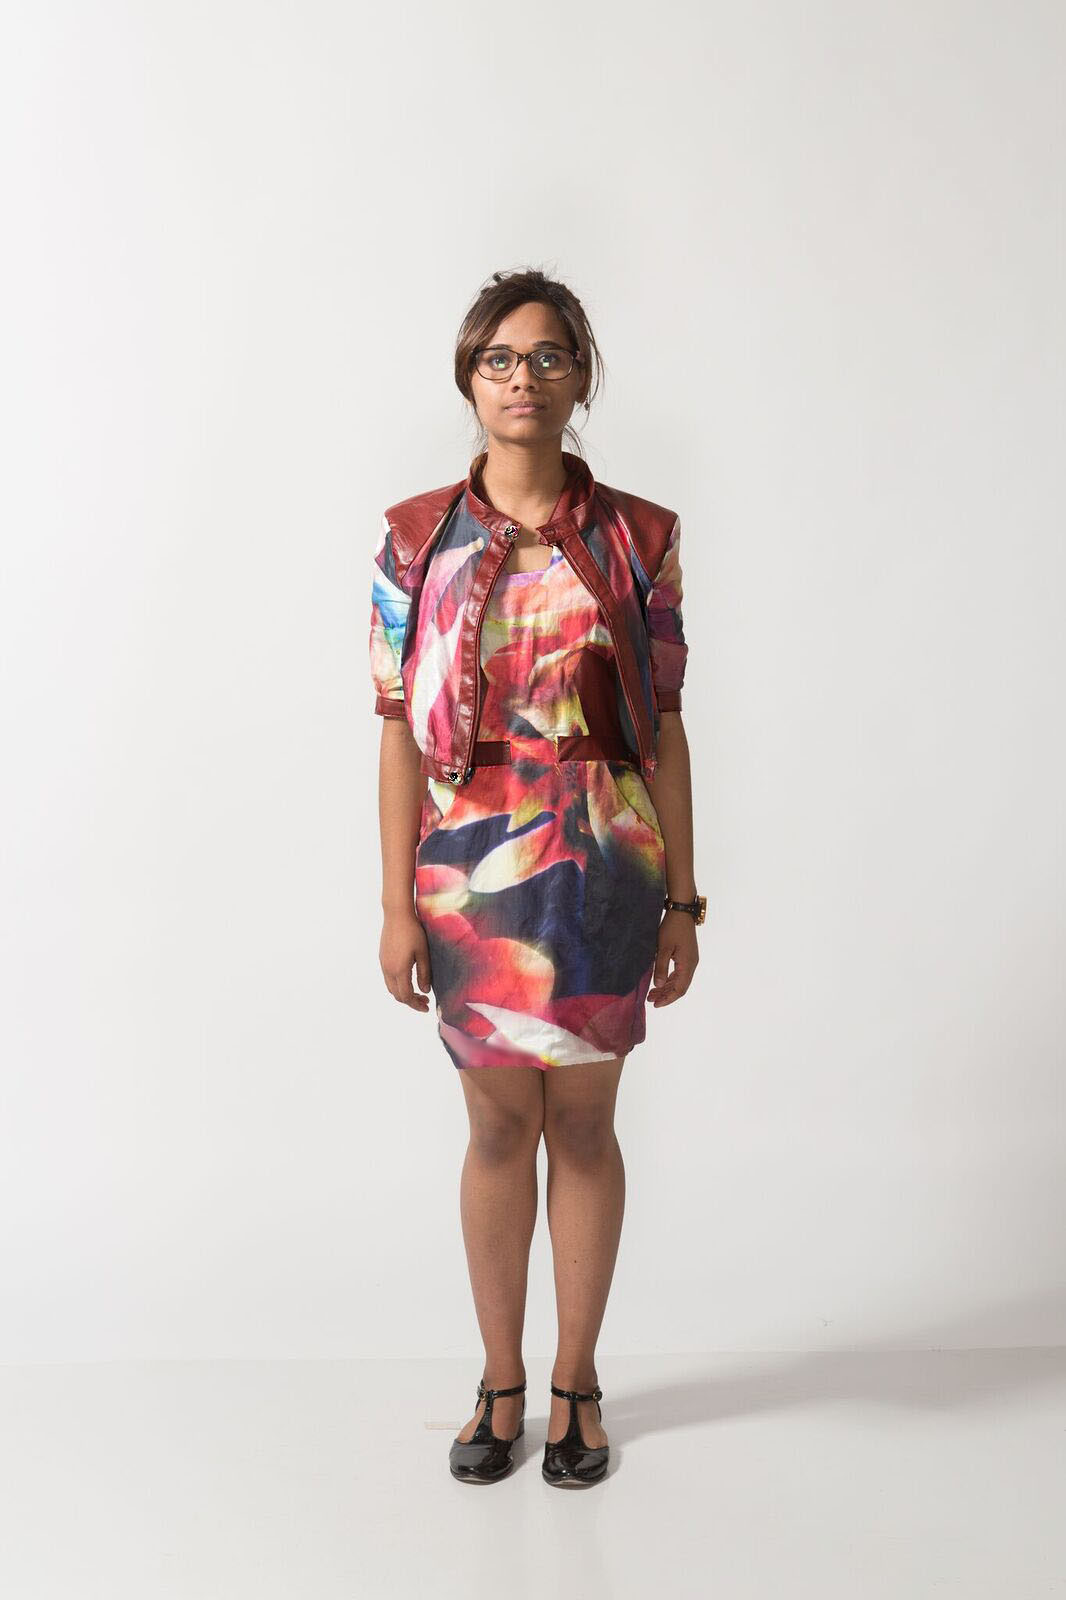 Style floral leather prtint sewing dress jacket